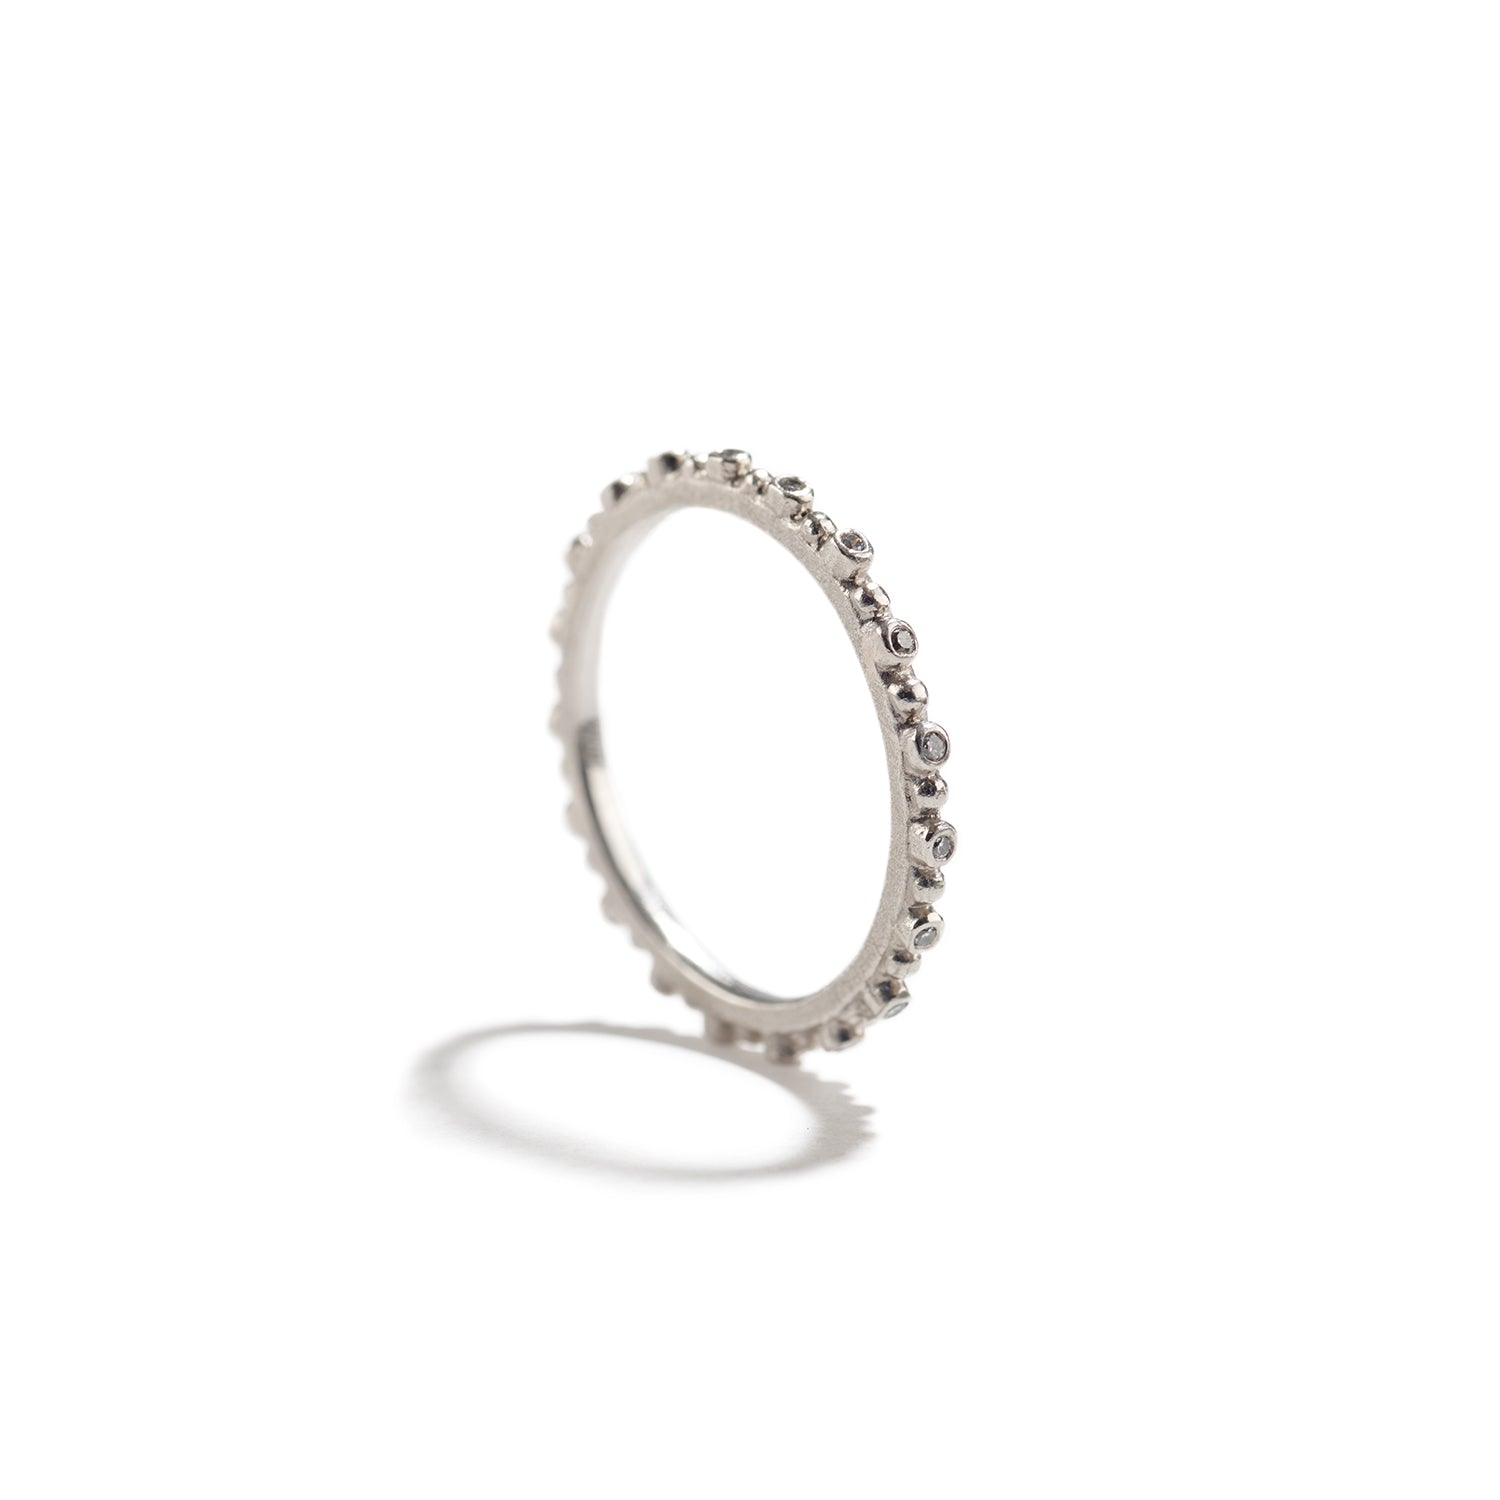 Pins and Needle Stacking Ring